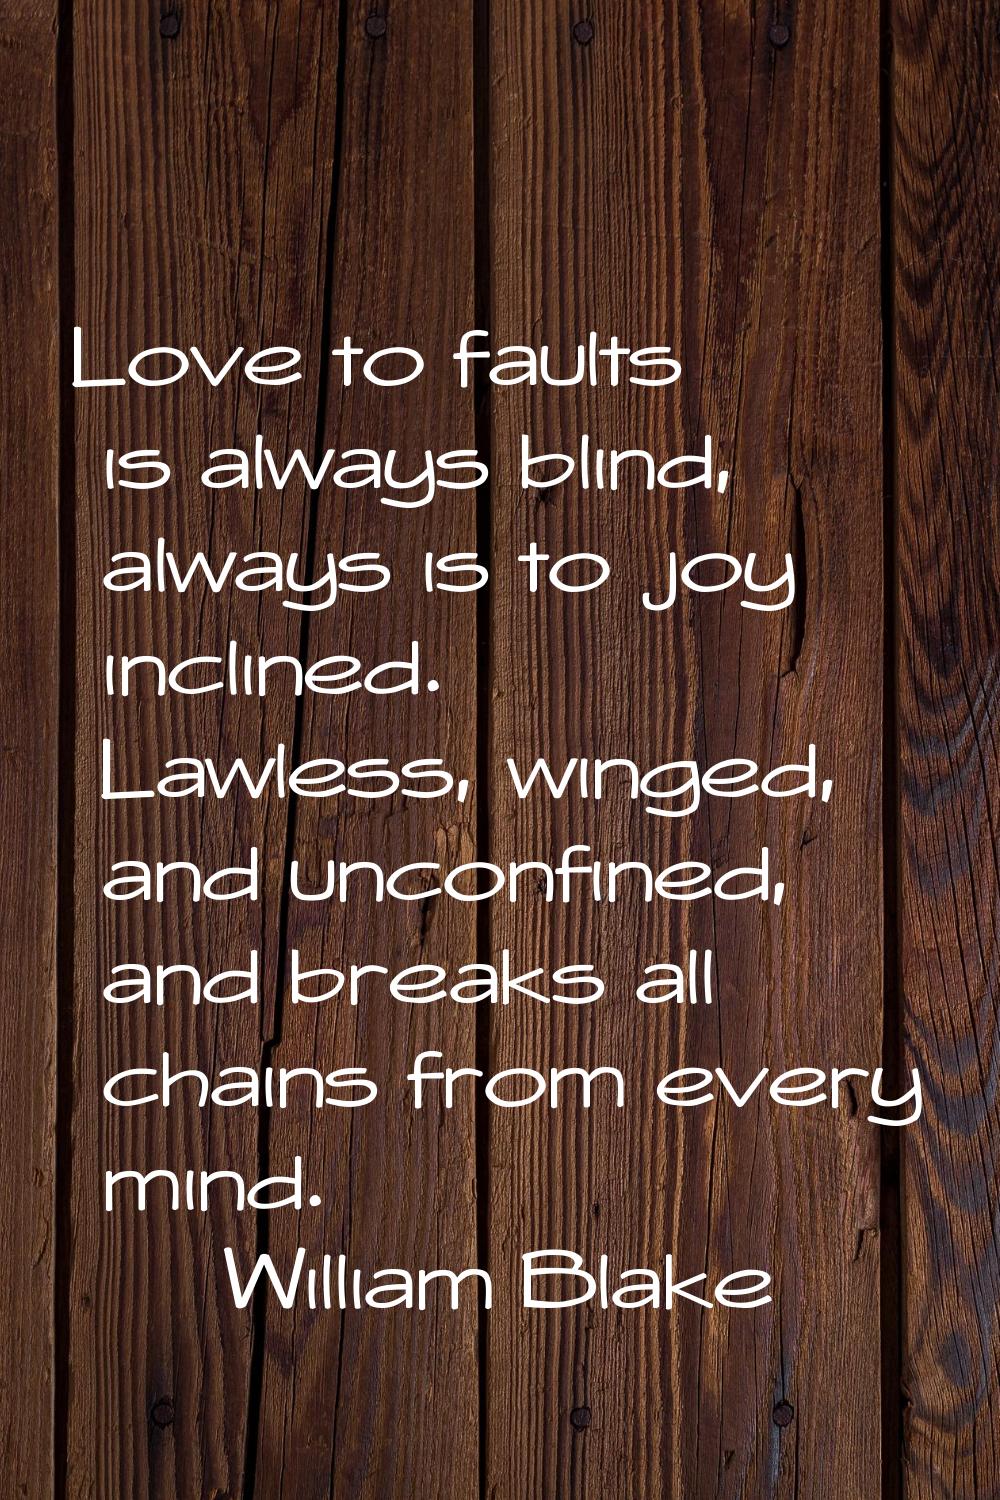 Love to faults is always blind, always is to joy inclined. Lawless, winged, and unconfined, and bre